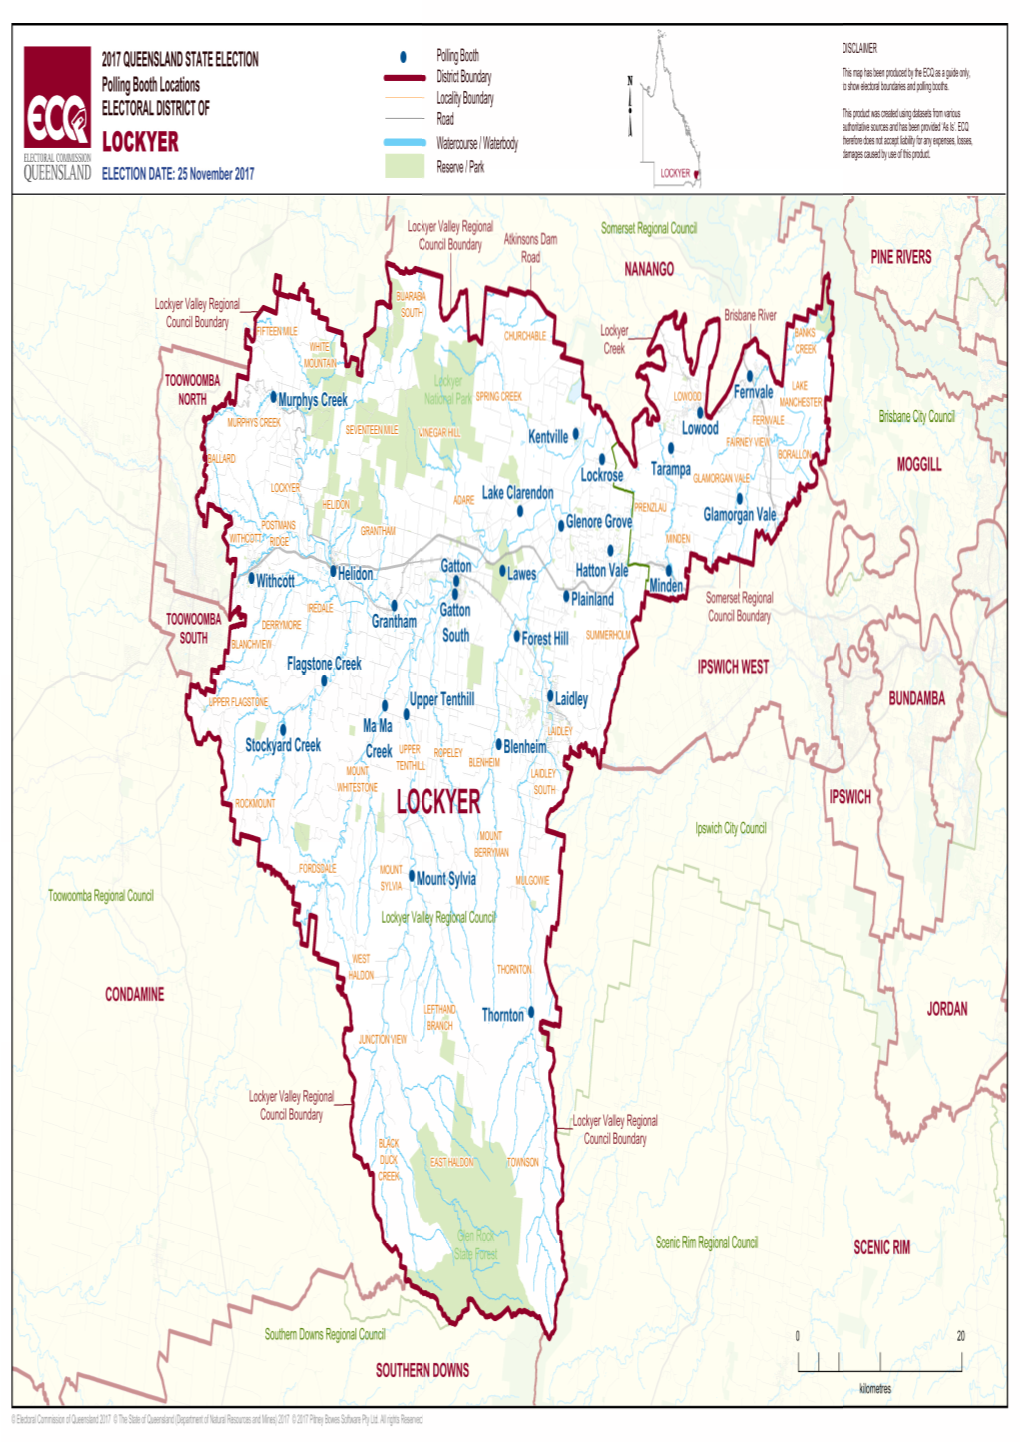 Polling Booth Locations ELECTORAL DISTRICT of LOCKYER